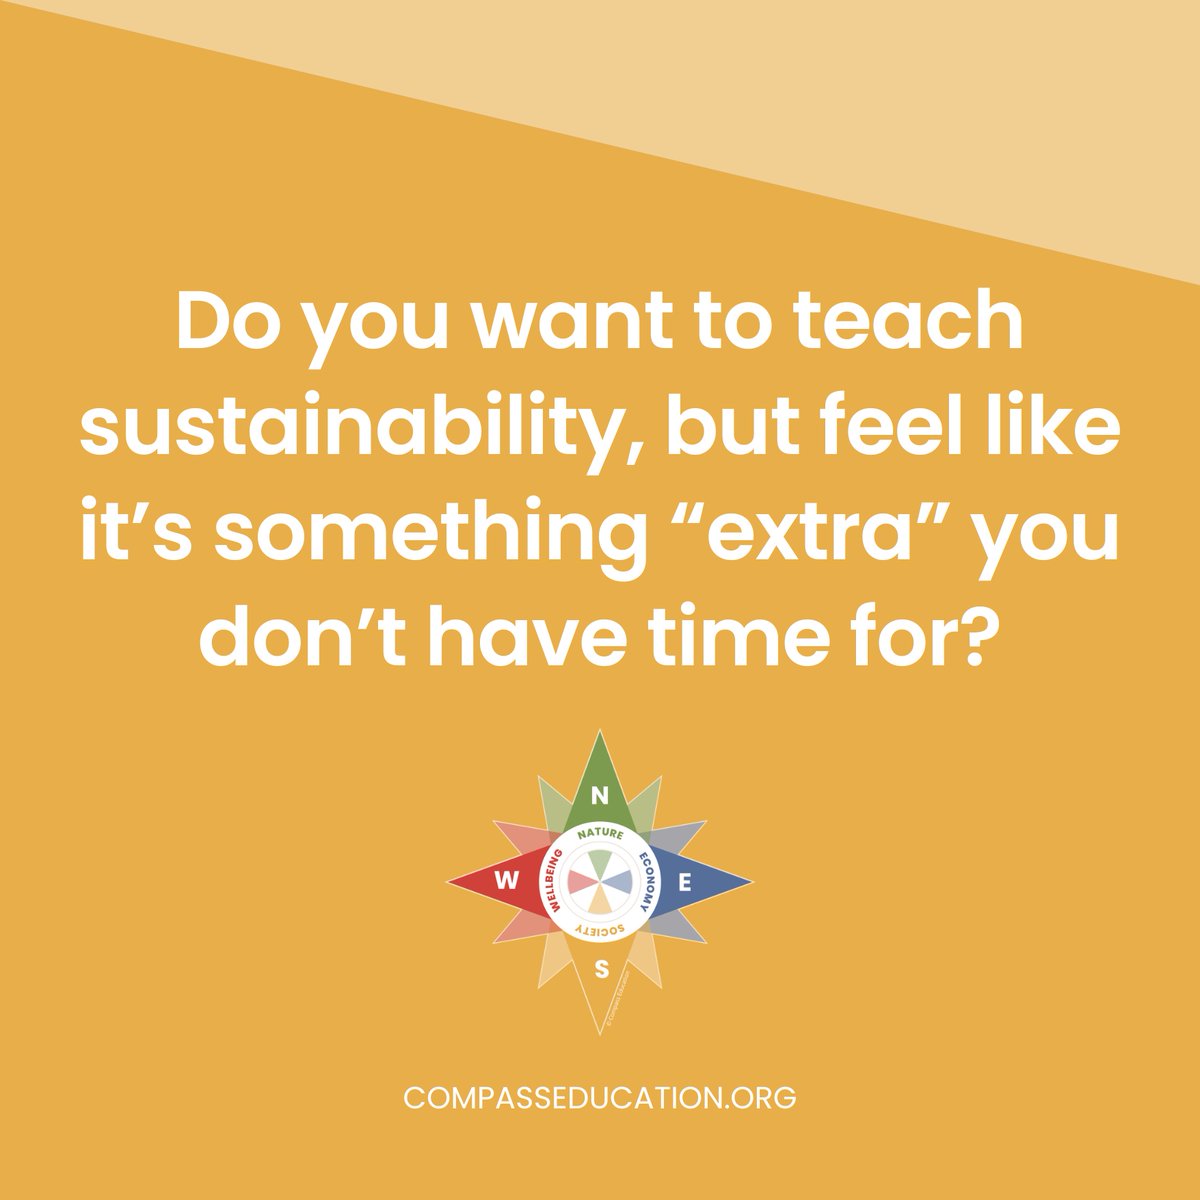 Learn how systems thinking tools can help you transform sustainability from something 'extra' to something extraordinary in your educational work with our 'Teaching and Learning for a Sustainable World: A Systems Thinking Approach' L1 Online Course! INFO: compasseducation.org/compass-educat…